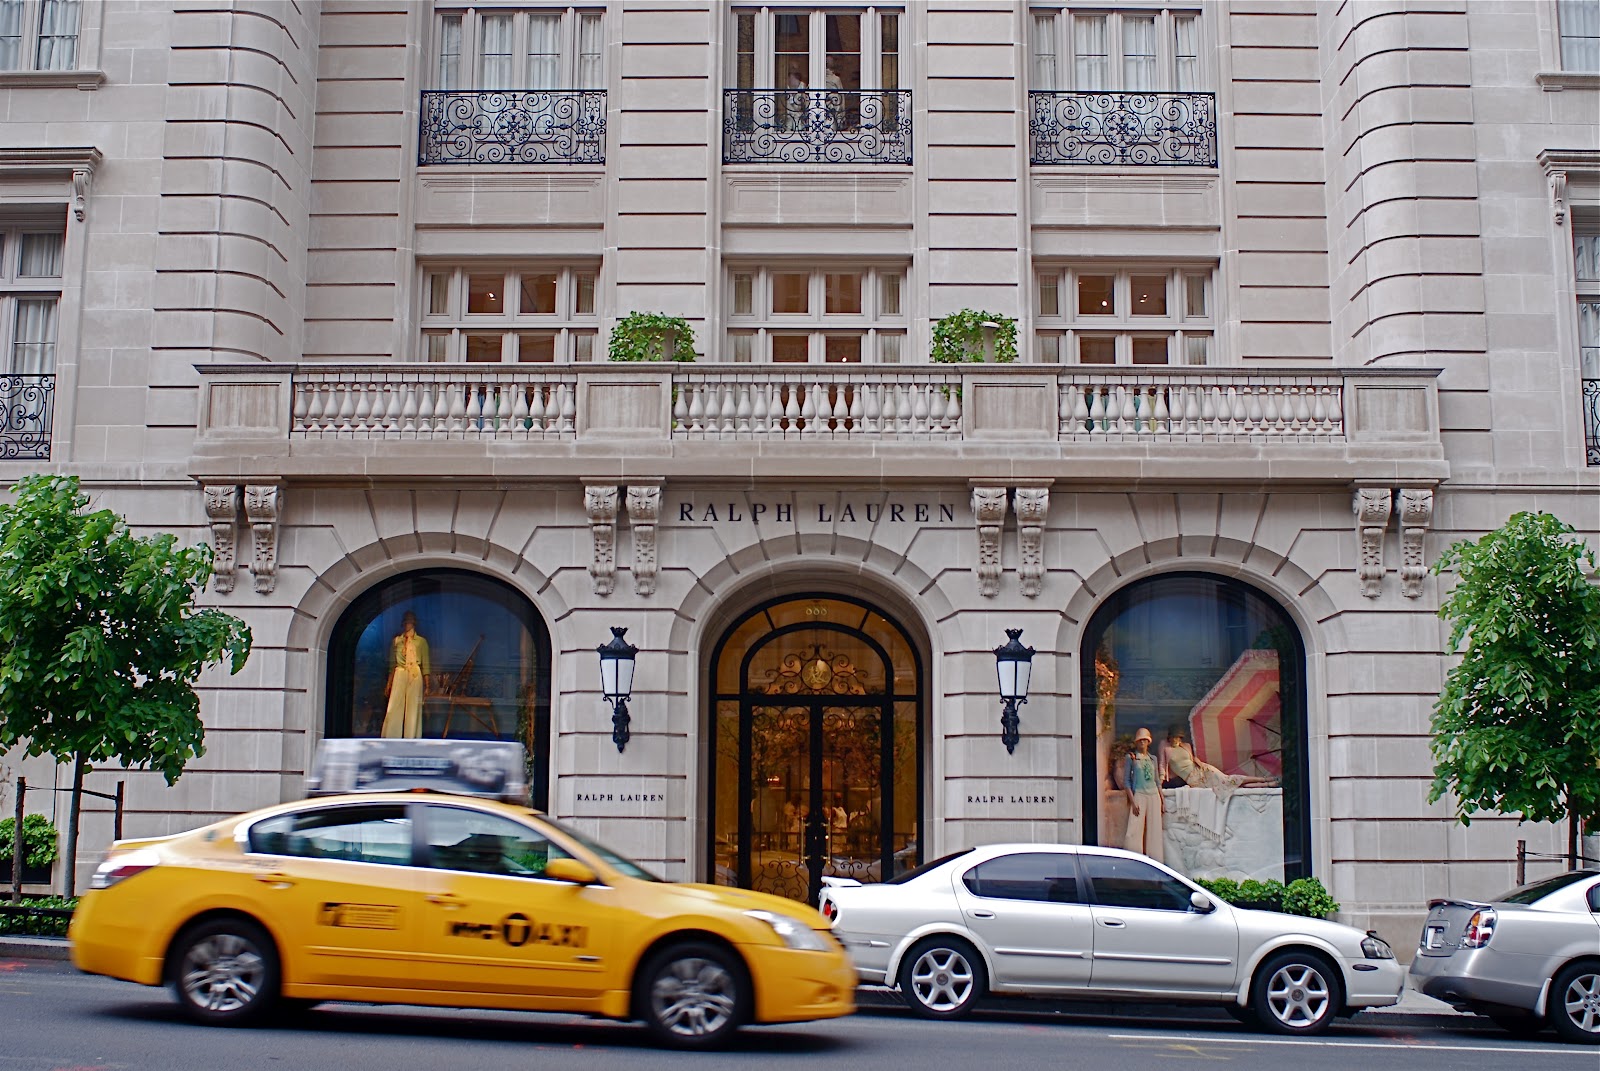 Madison Avenue and 72nd Street - Ralph Lauren Flagship Store - The